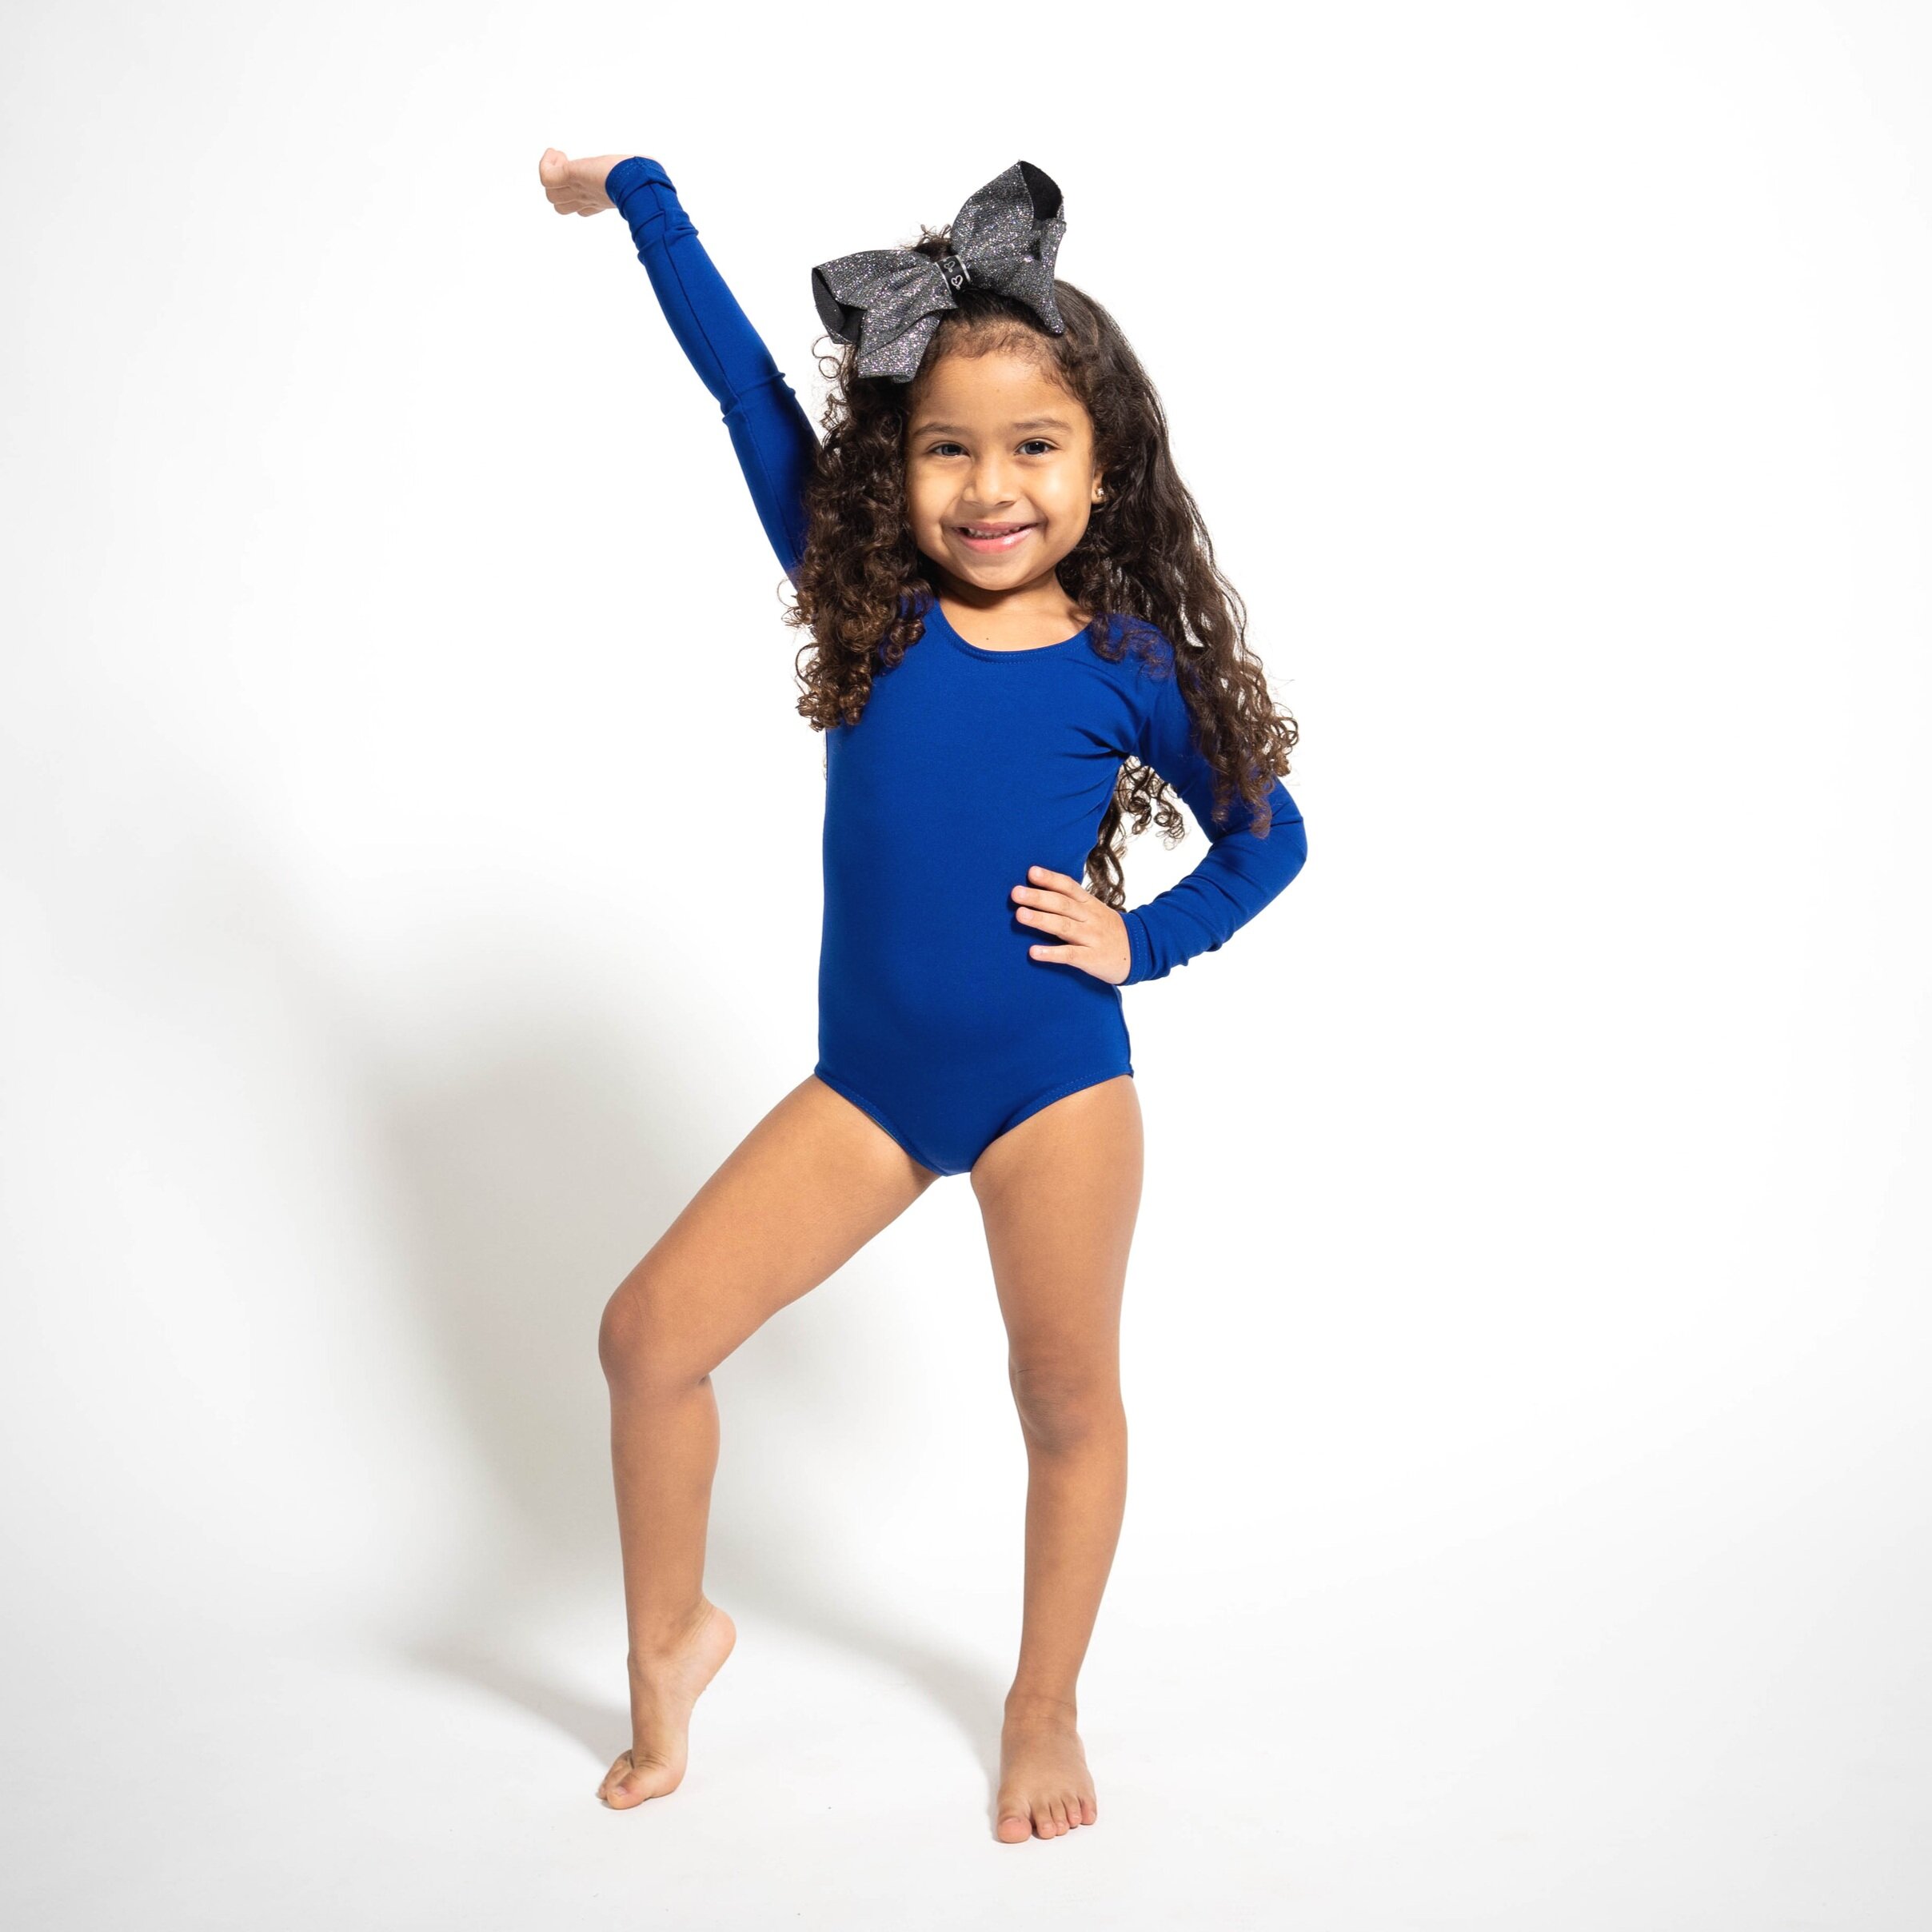 Photo of little girl in a dance pose.